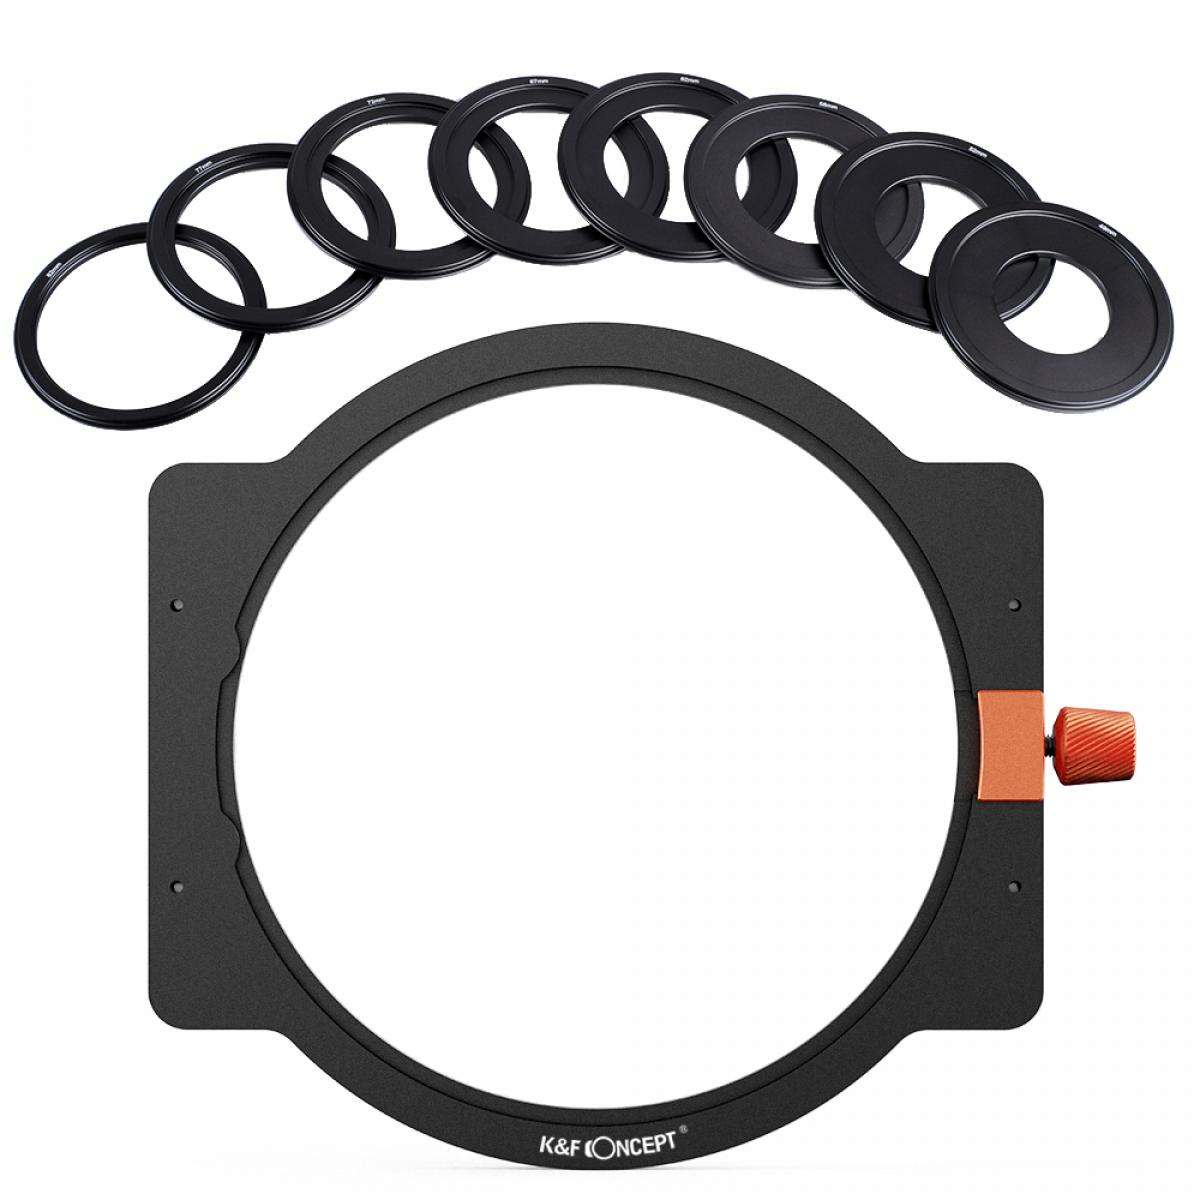 Product Image of K&F Concept Metal Square Filter Holder 100mm with 8 Lens Filter Adapter Rings 49mm-82mm